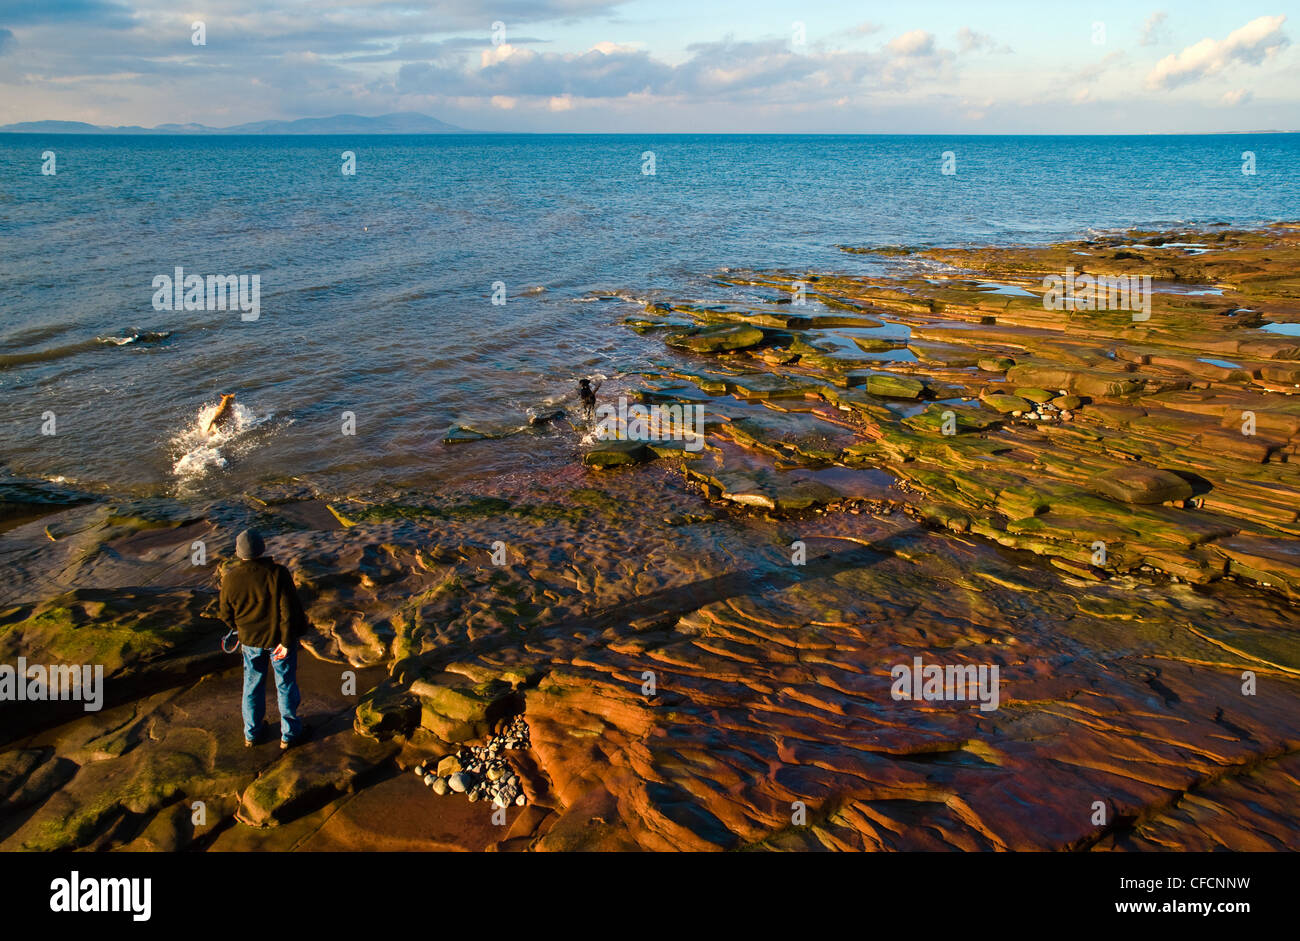 Man and dogs on rocky shoreline at Maryport, Cumbria, looking across the Solway Firth to the hills of Galloway in Scotland Stock Photo